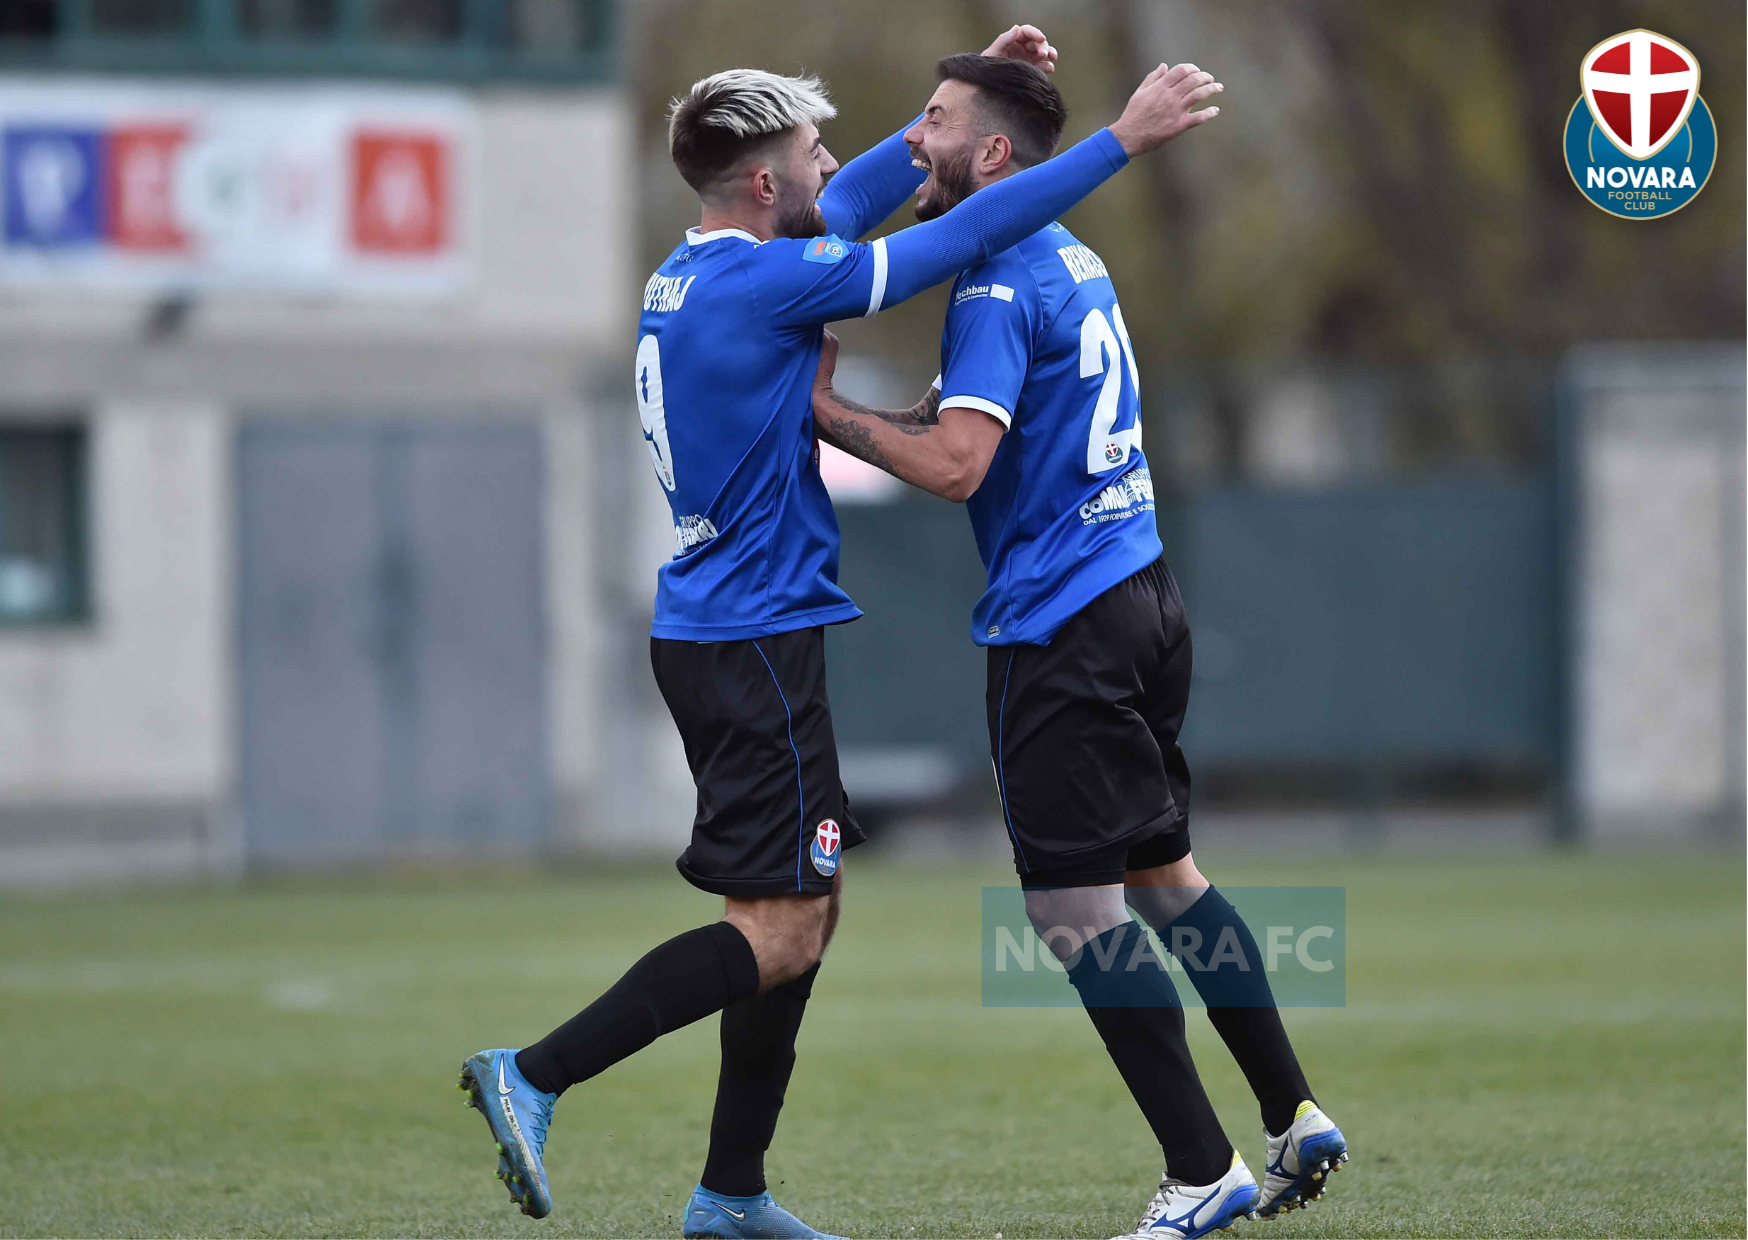 Read more about the article PDHAE-Novara 2-2 | Gallery